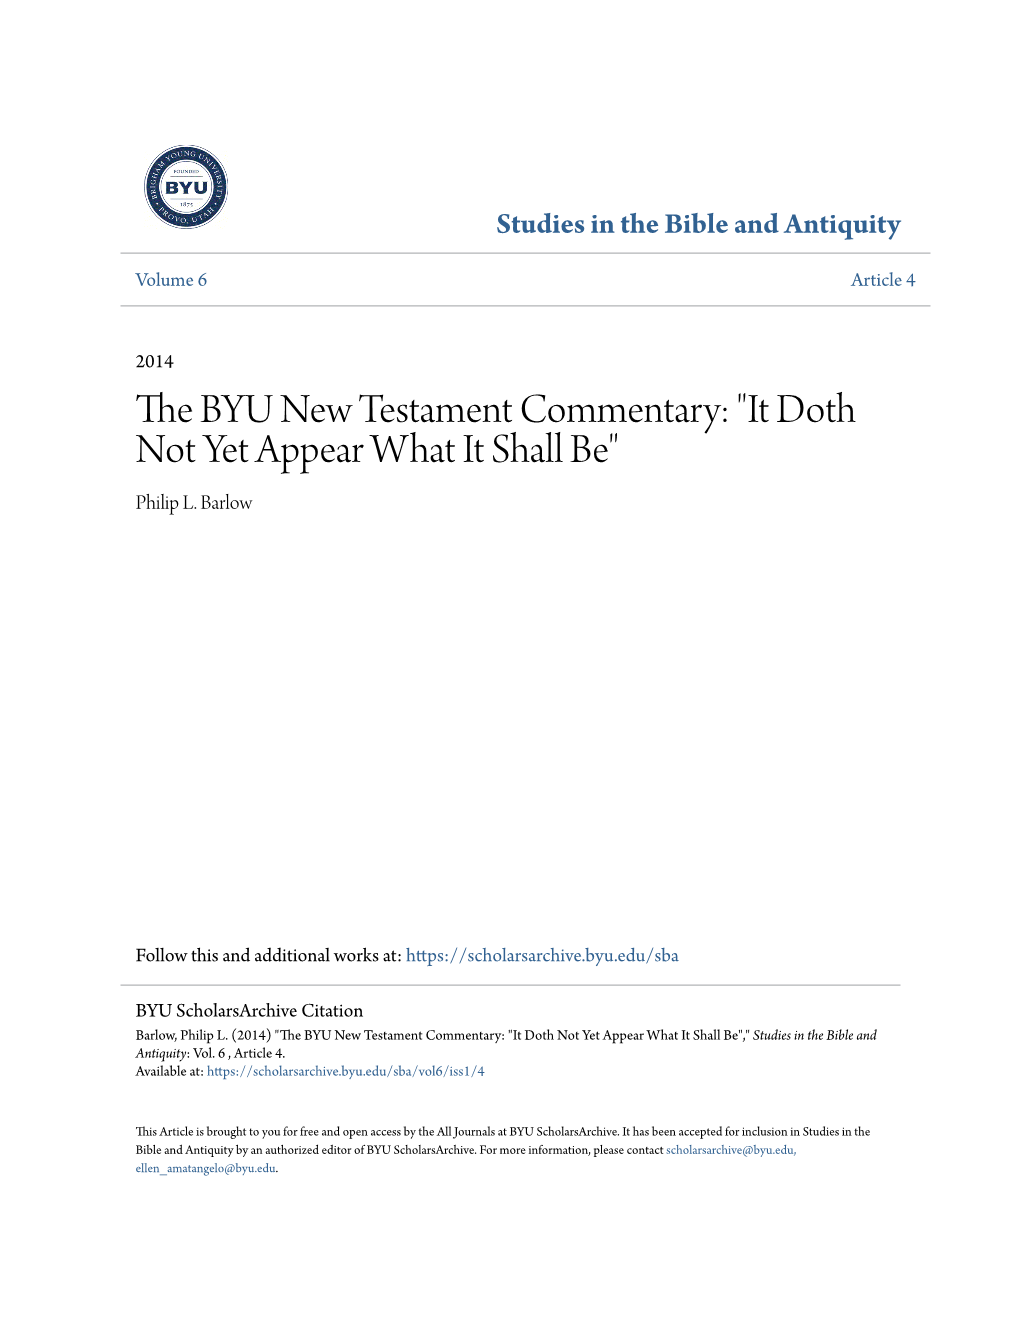 The BYU New Testament Commentary: "It Doth Not Yet Appear What It Shall